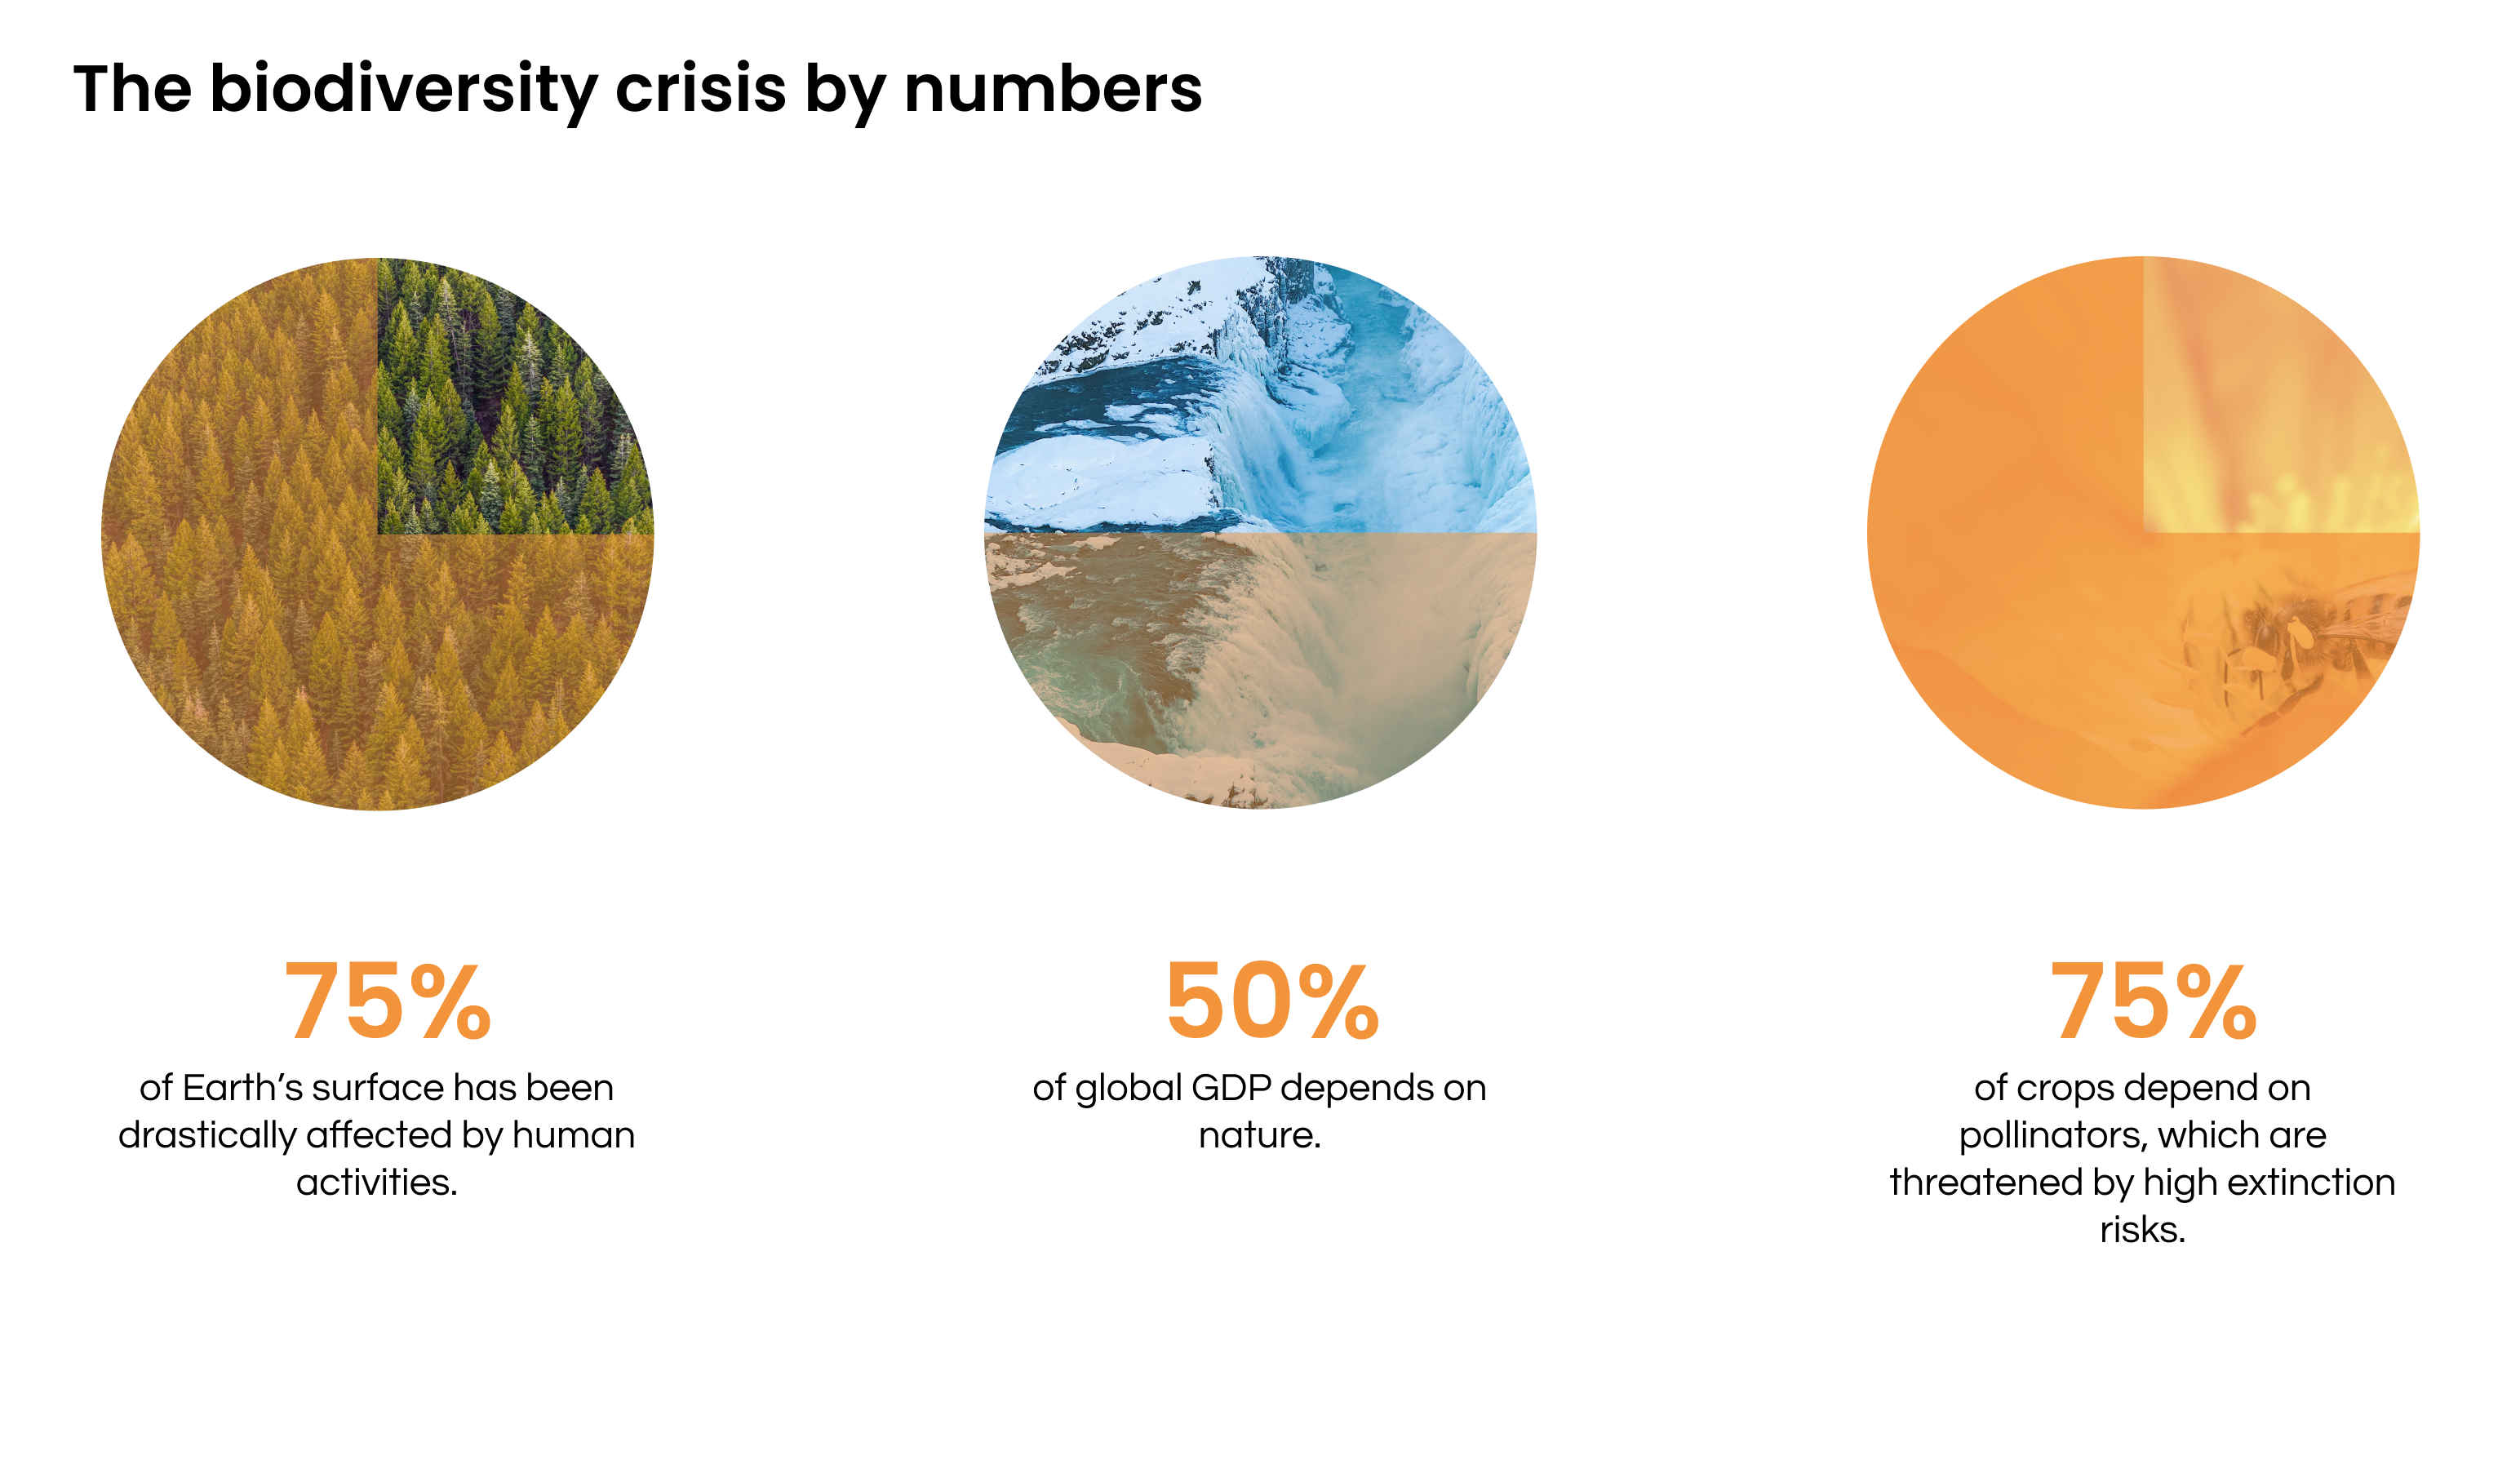 Figure 1. The biodiversity crisis by numbers